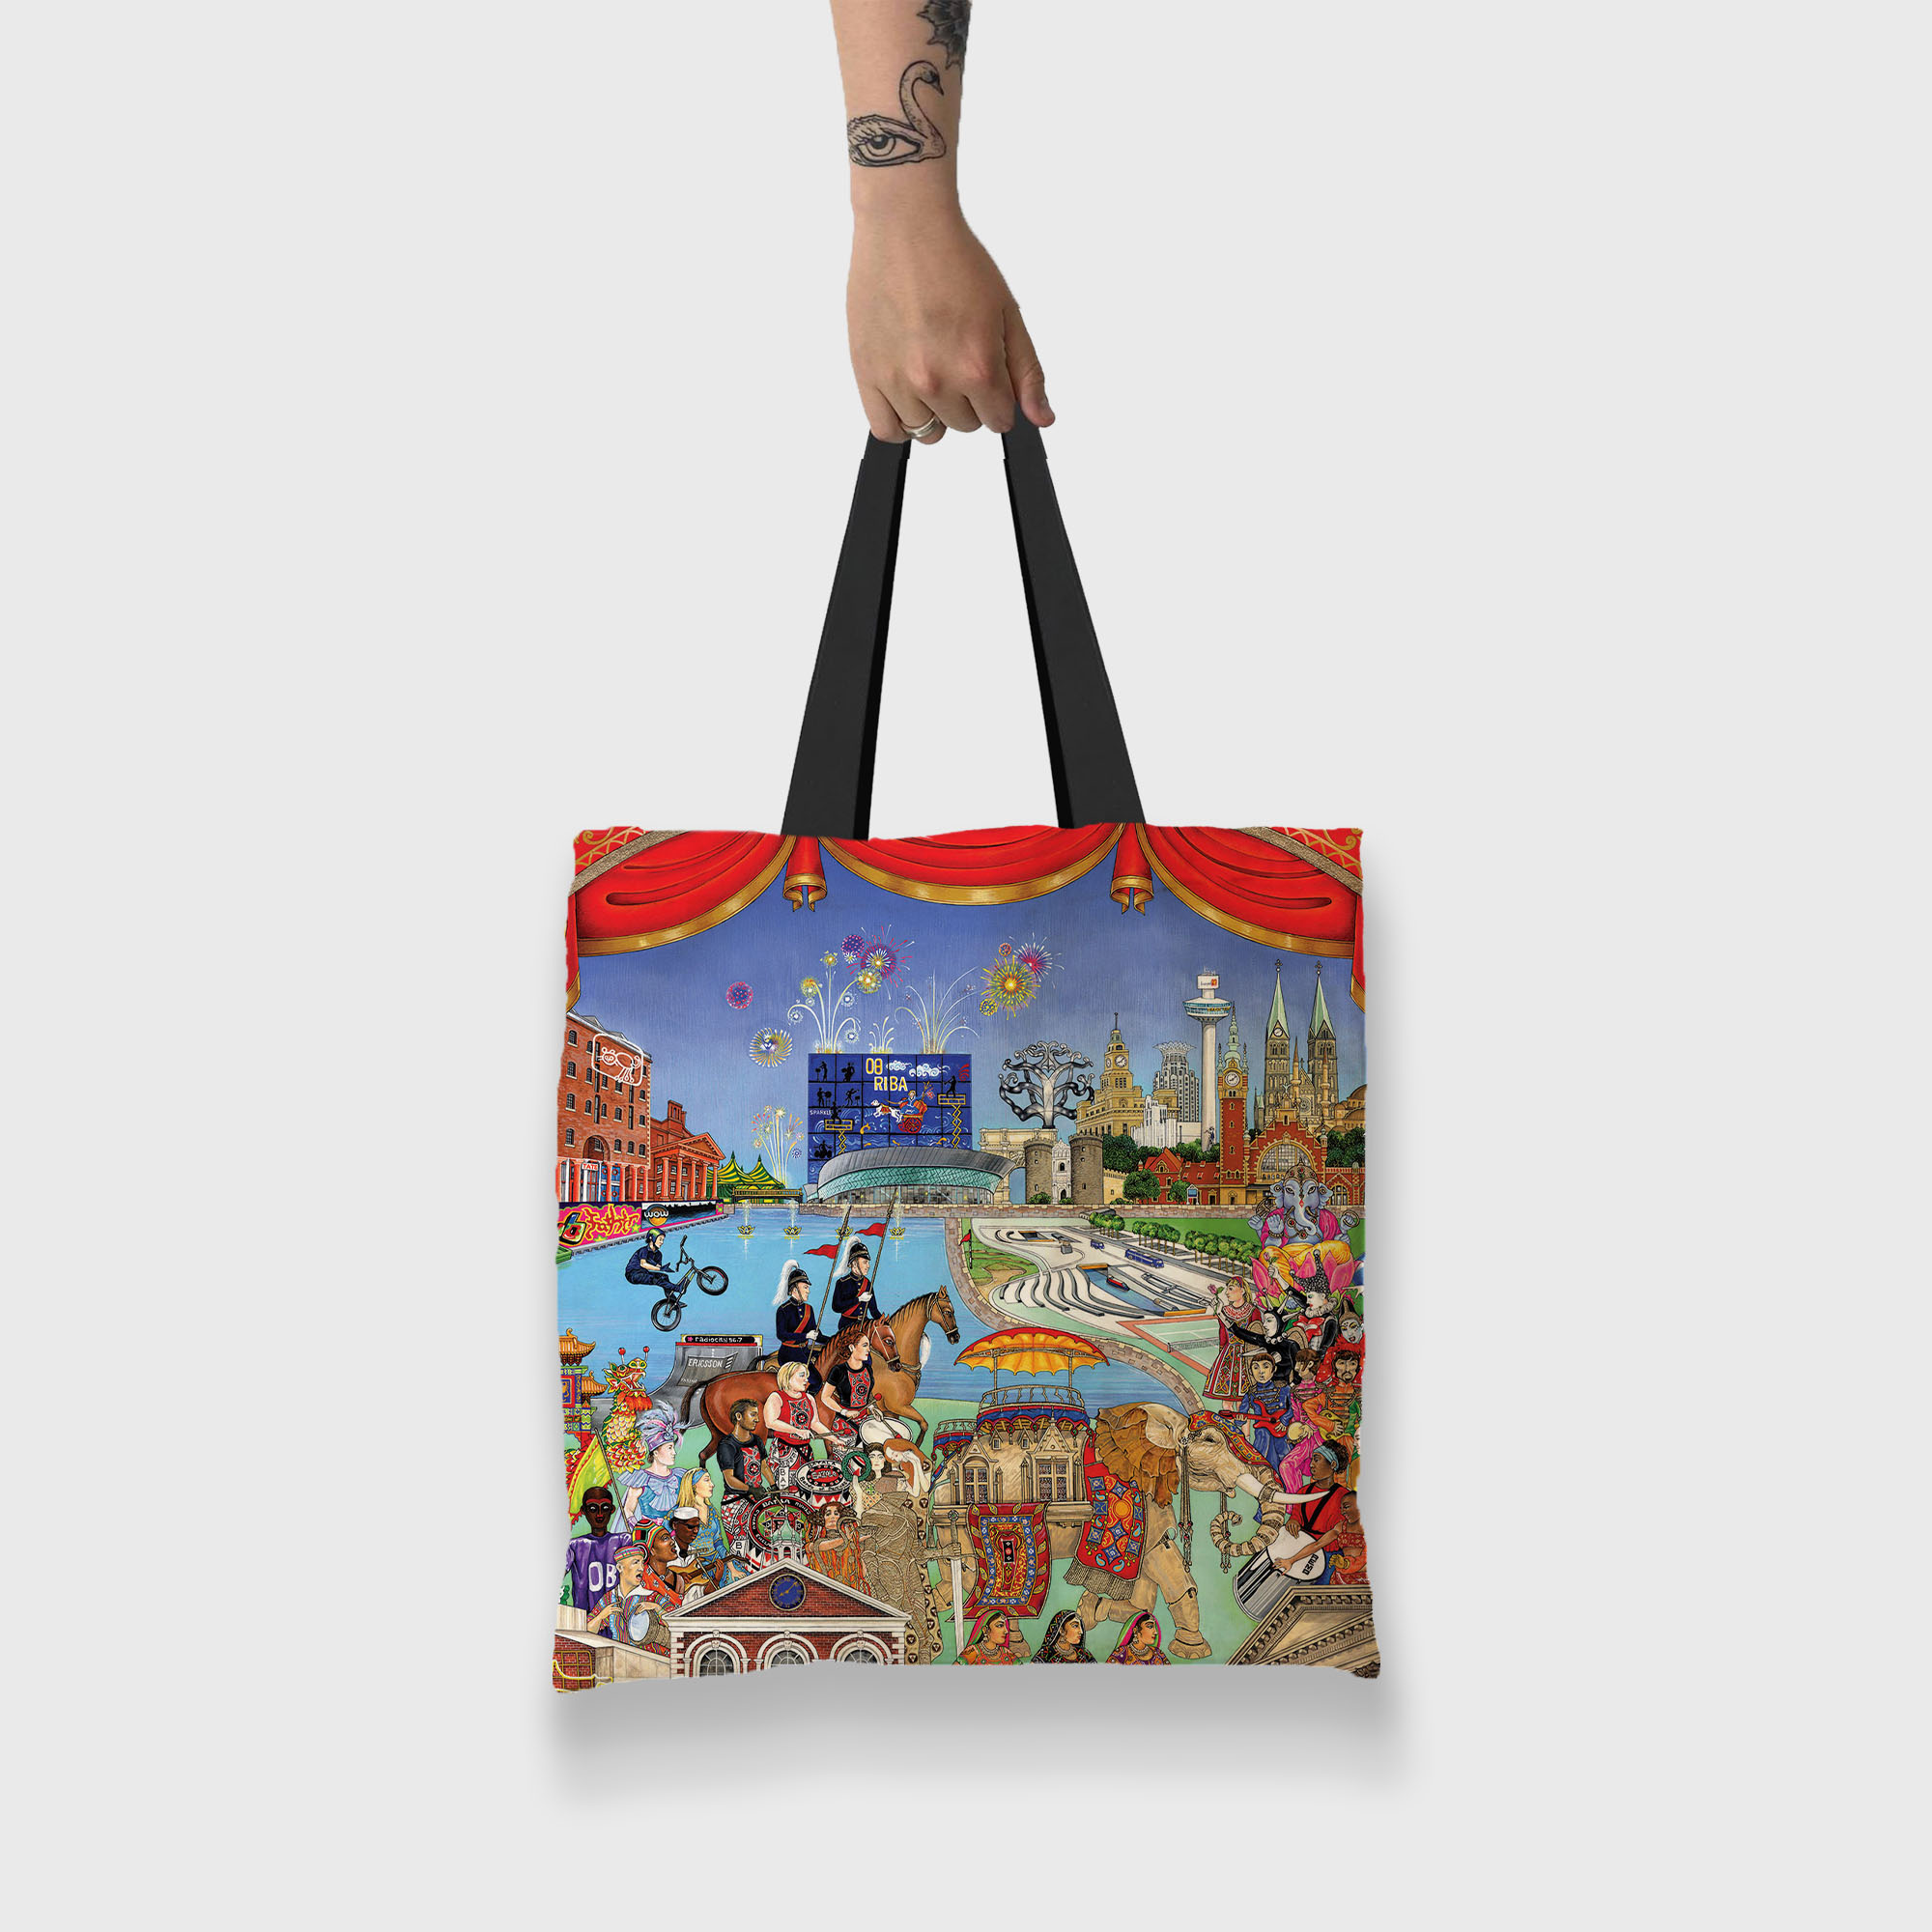 Arts Matters: The Pool Of Life – Singh Twins Tote Bag